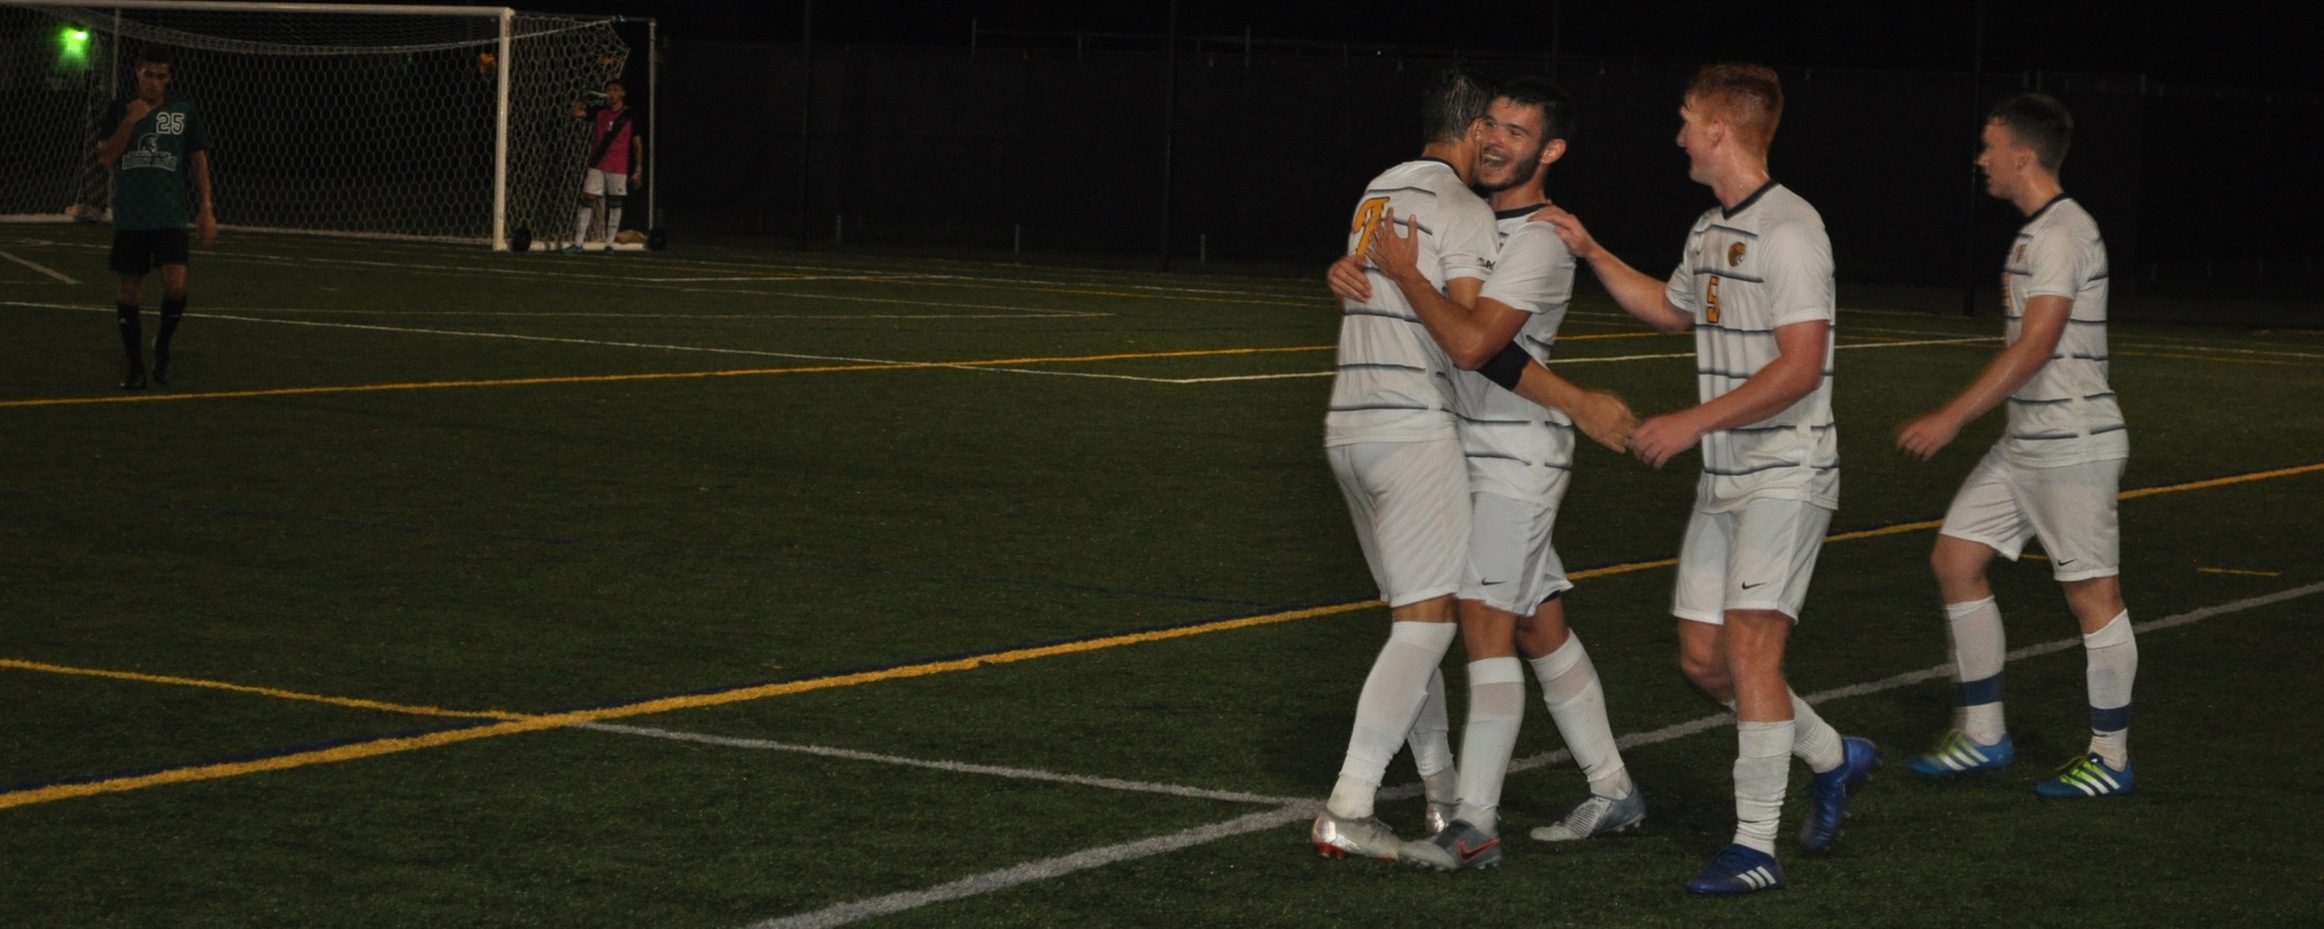 Cobras Win Second Straight with 4-1 Victory over Mount Olive